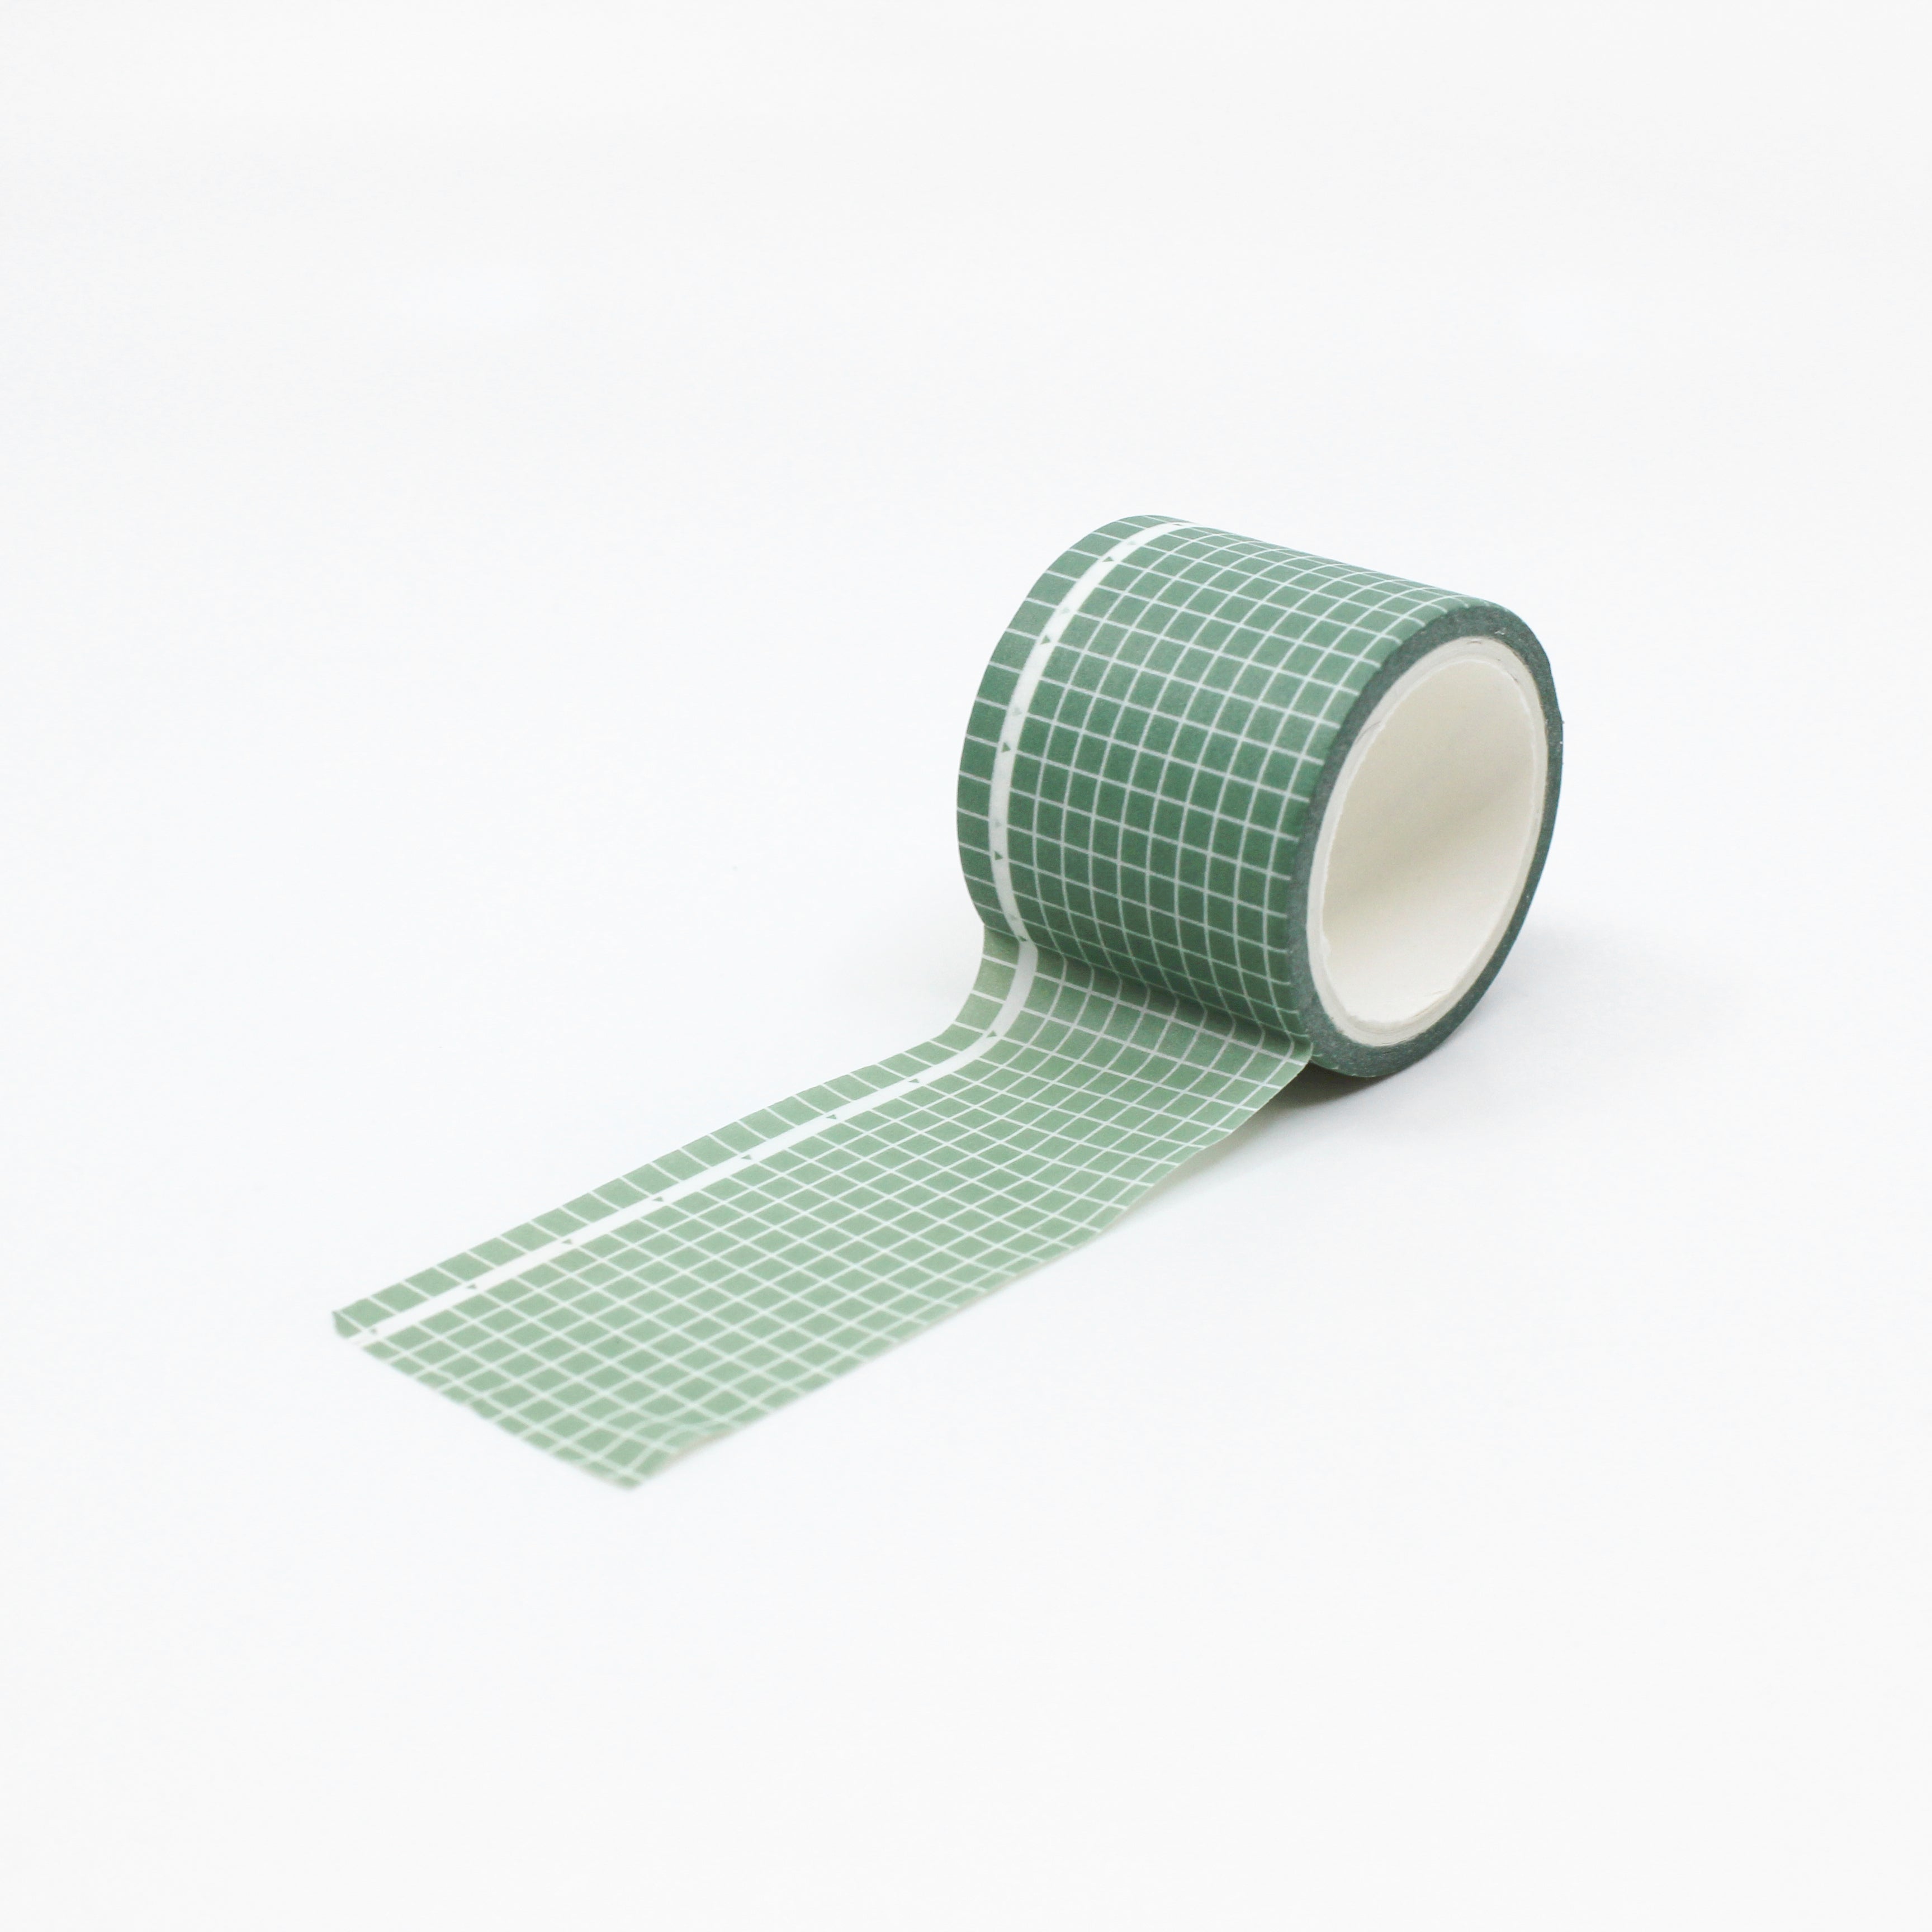 This is a full pattern repeat view of green wide grid washi tape BBB Supplies Craft Shop